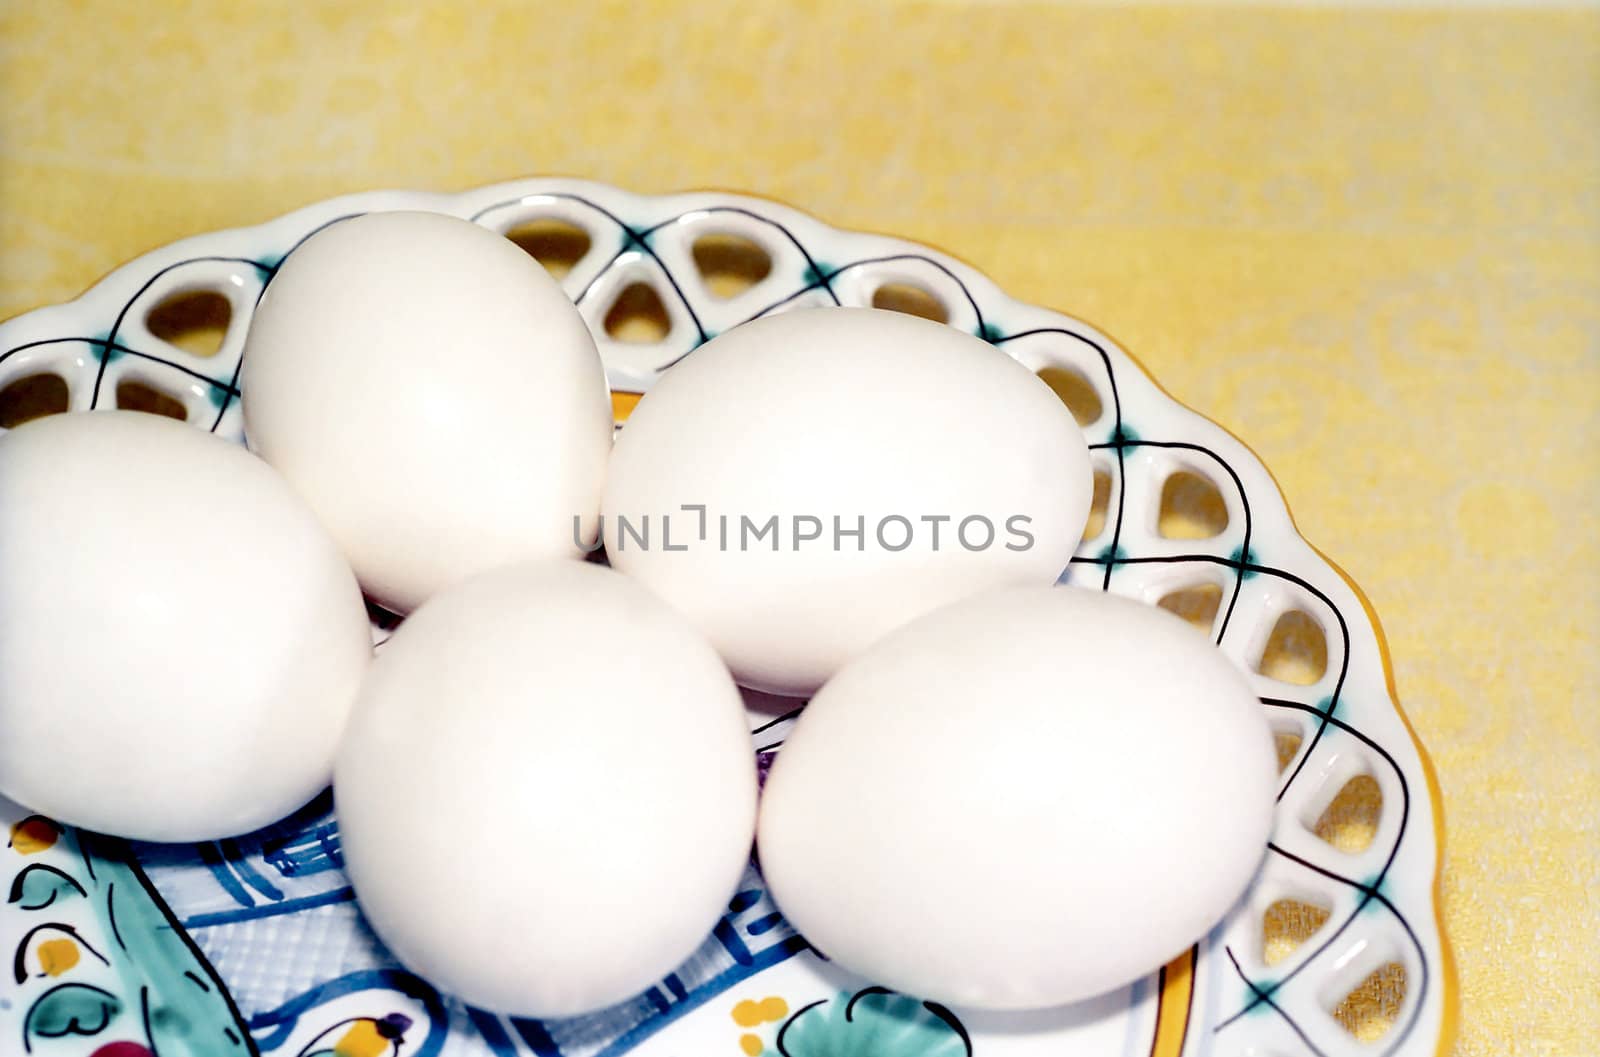 Five eggs on the plate by mulden